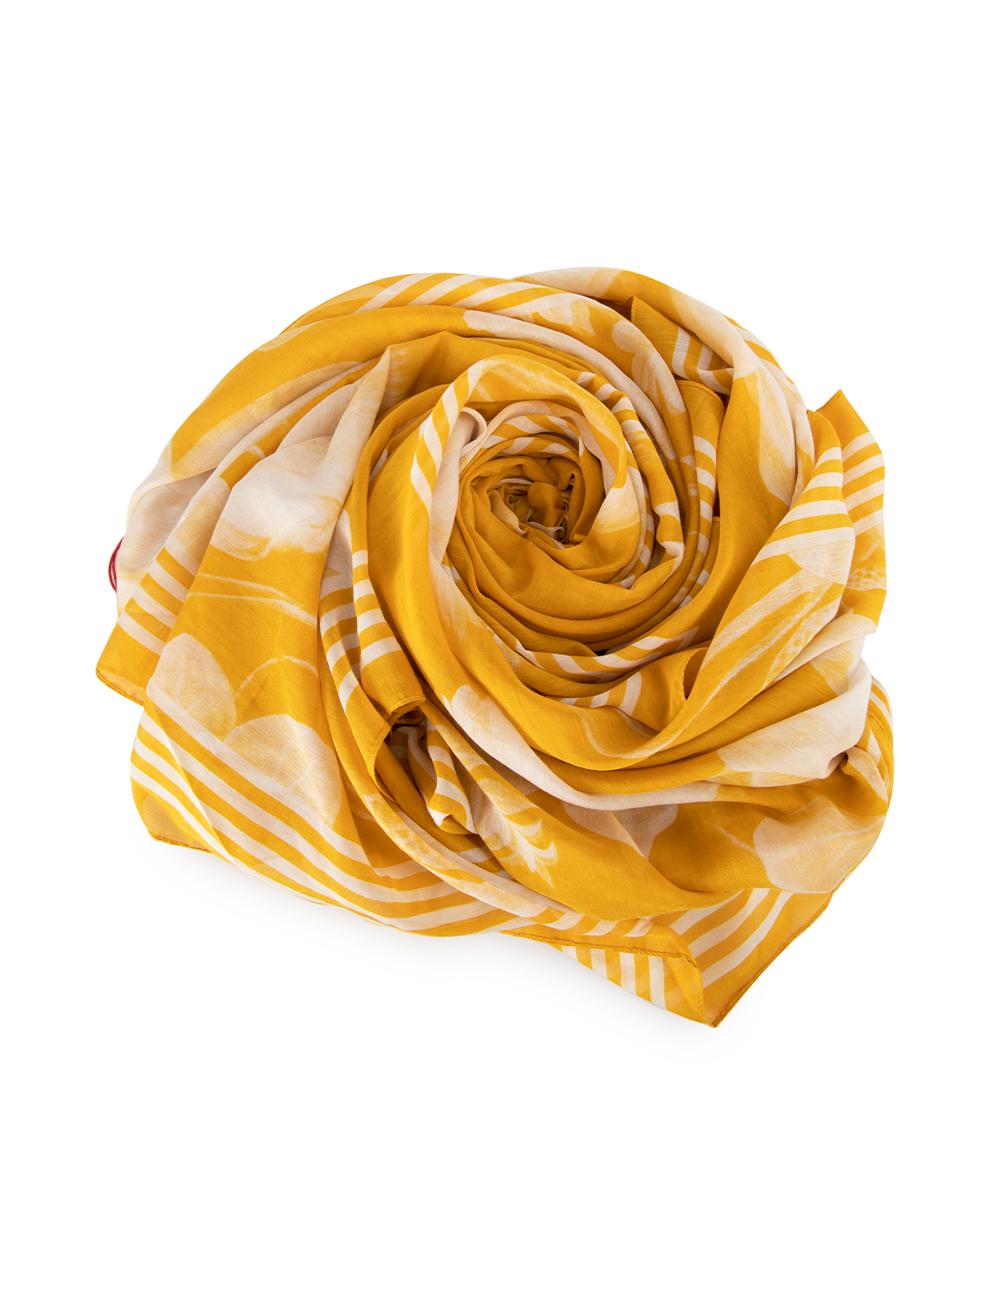 CONDITION is Never worn, with tags. No visible wear to scarf is evident on this new Alexander McQueen designer resale item.



Details


Yellow

Cotton

Square scarf

Floral print



 

Made in Italy 

 

Composition

EXTERIOR: 78% Cotton, 22%